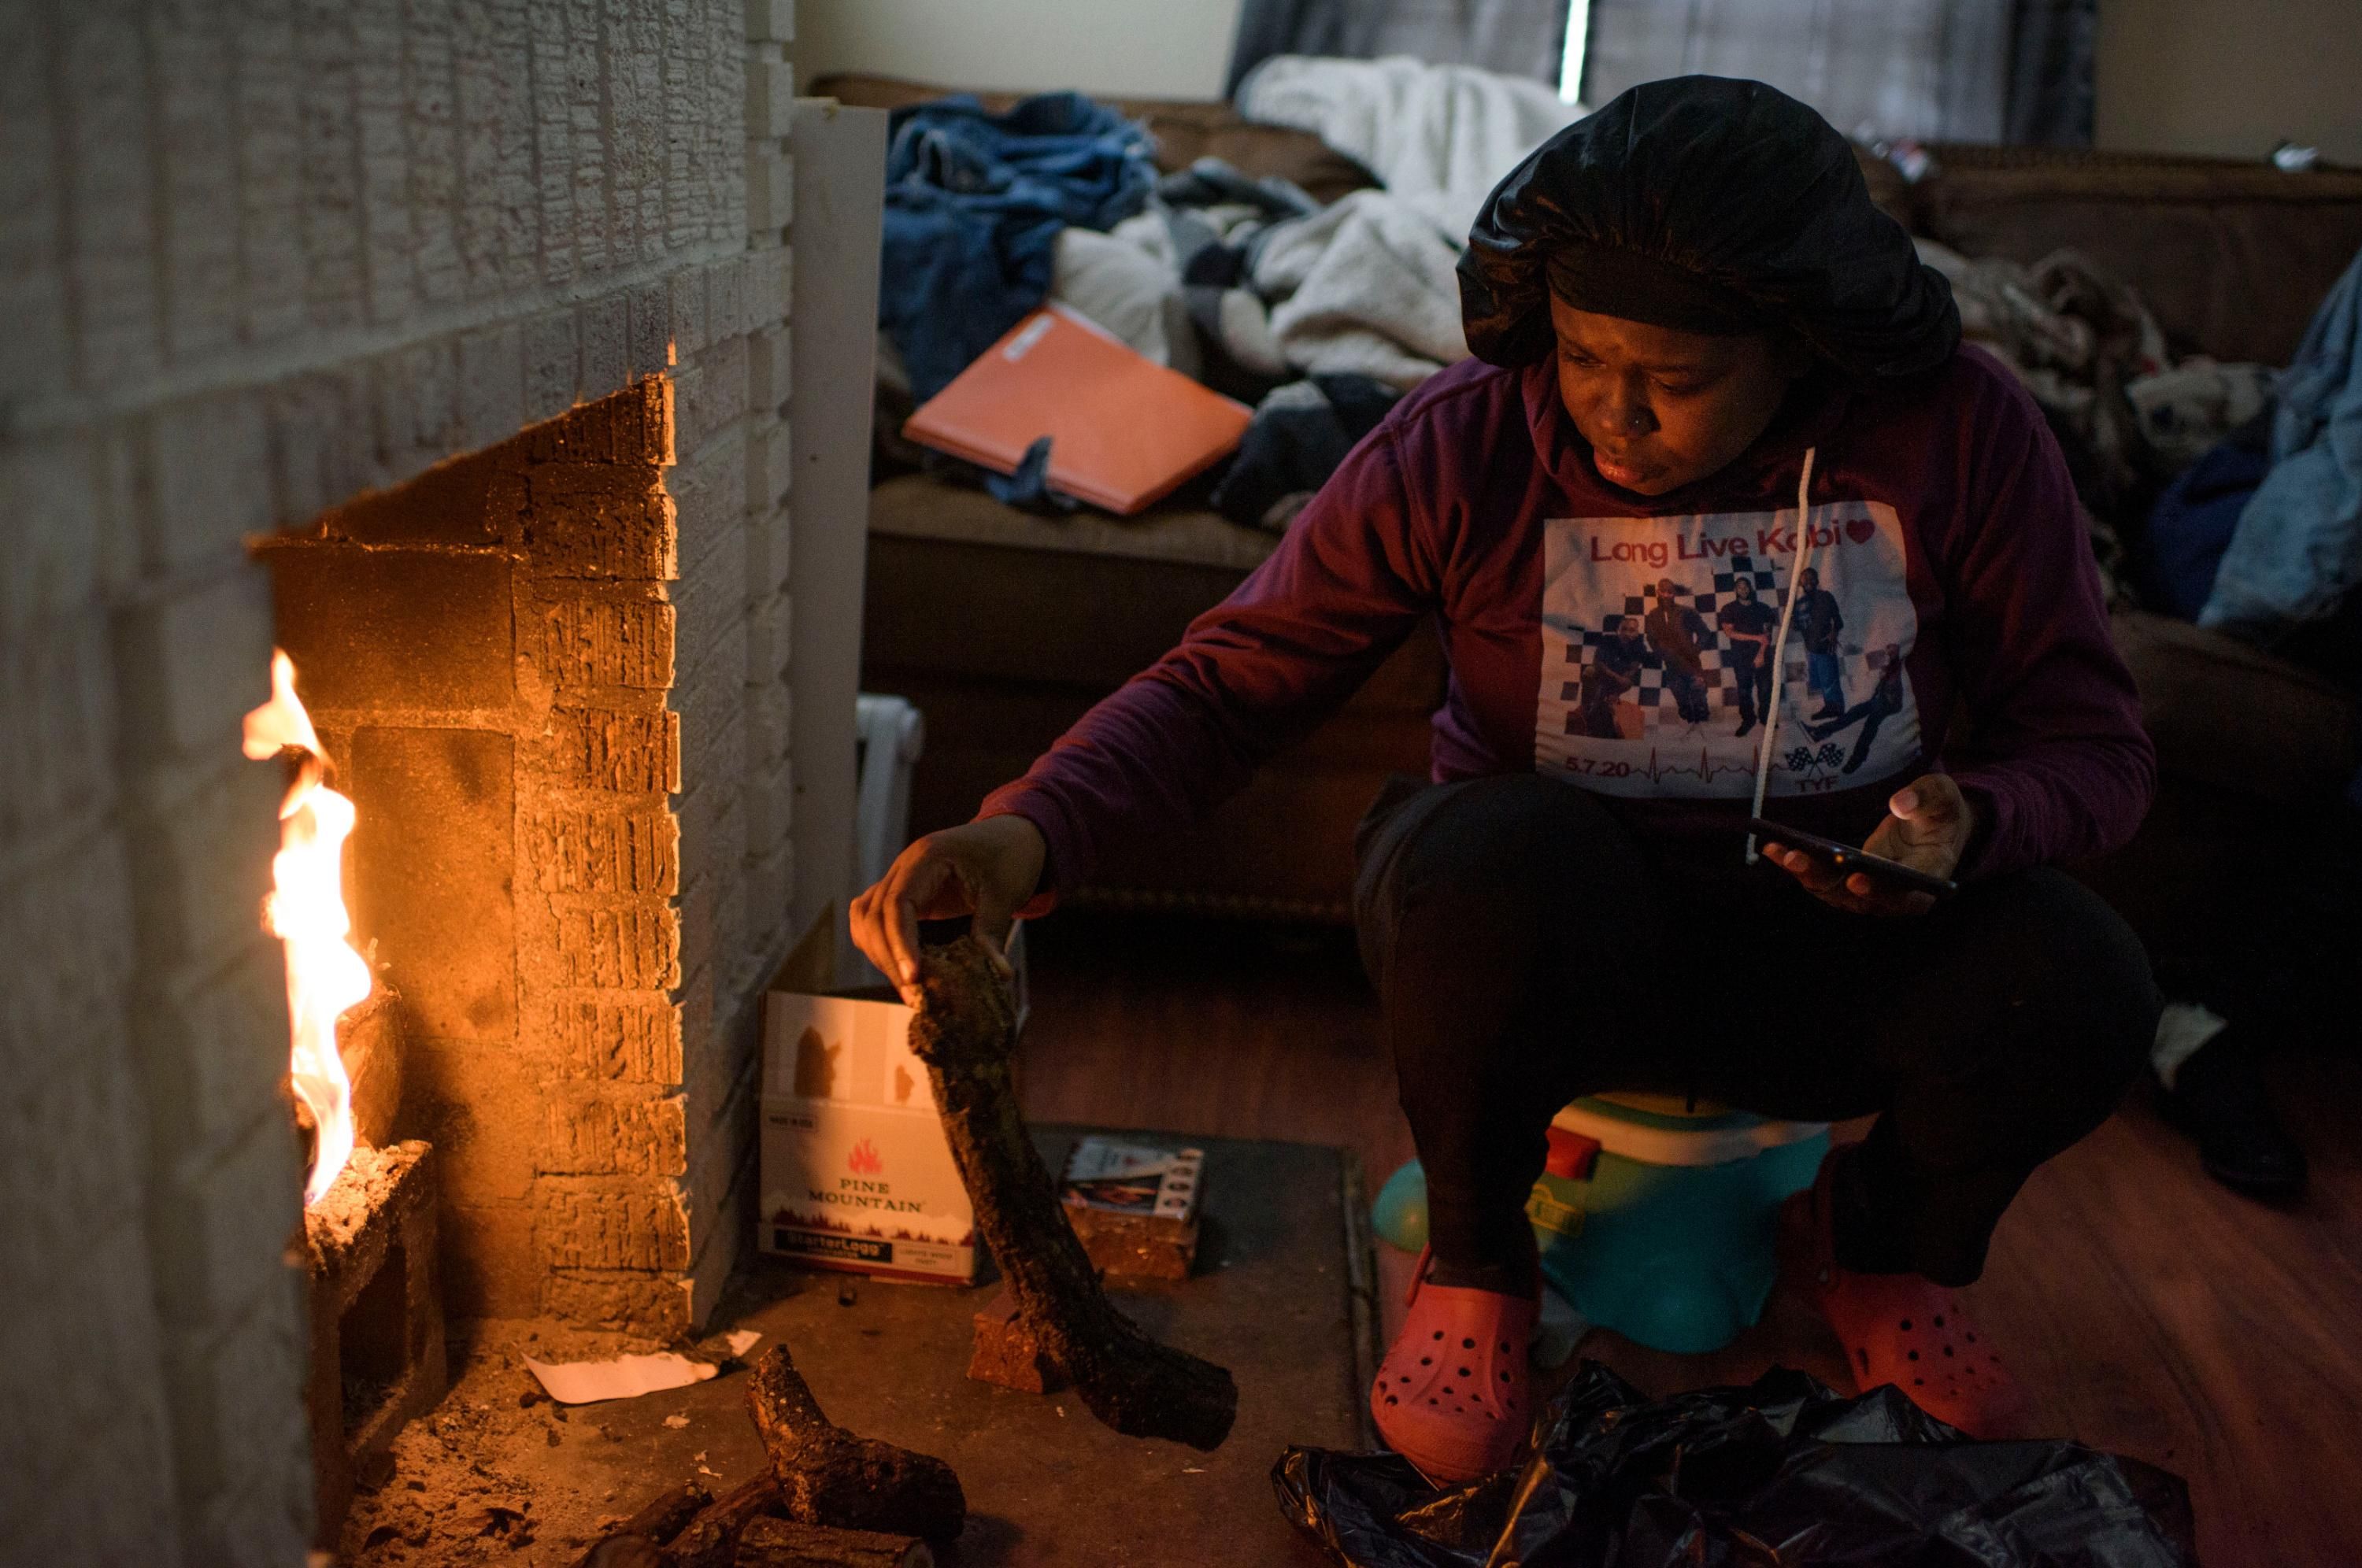 A woman uses a fire to provide heat in her home